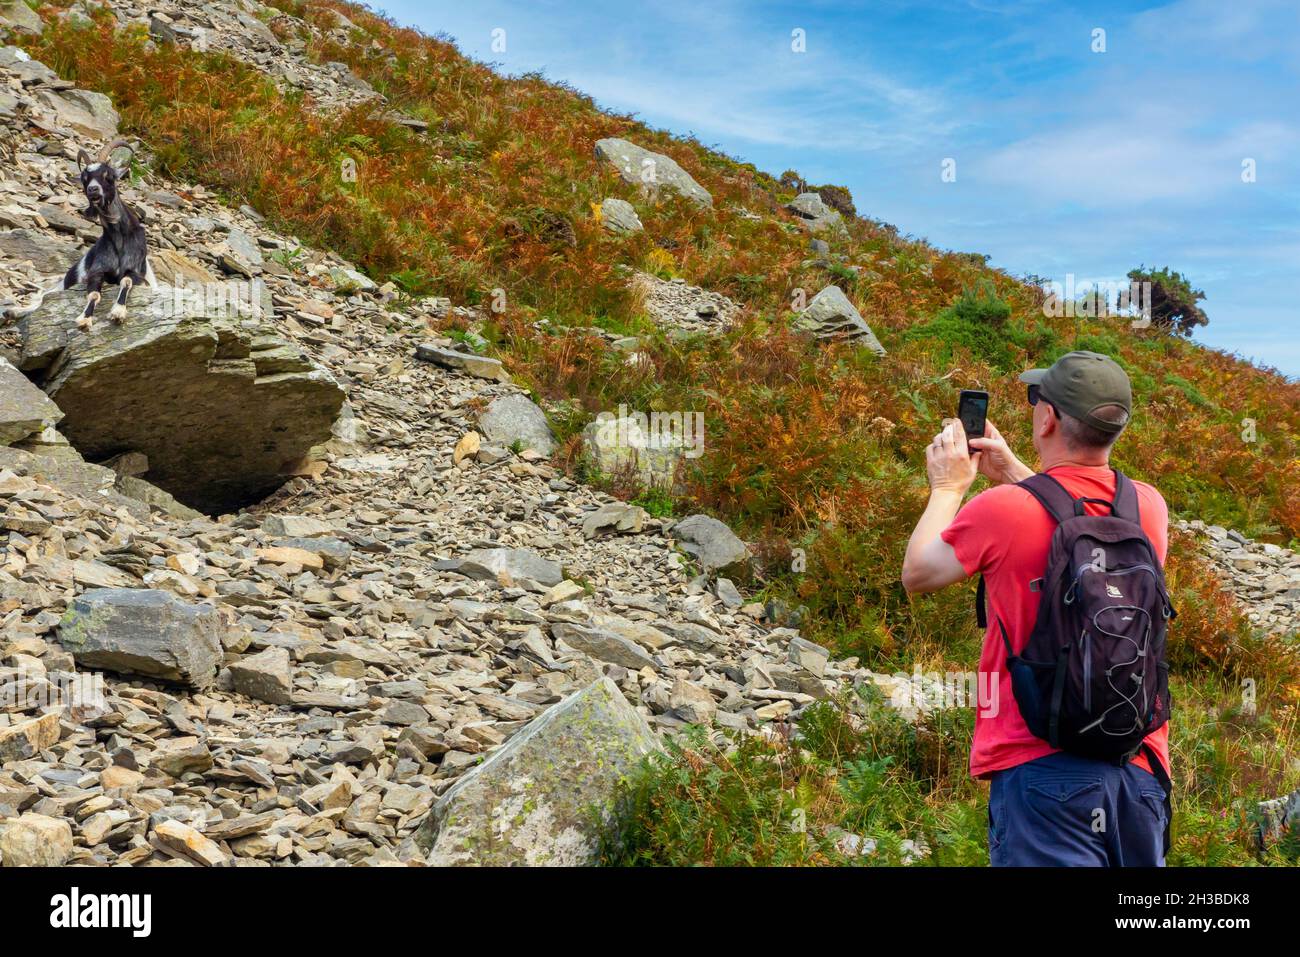 Tourist taking photograph of wild goat at The Valley of Rocks near Lynmouth in Exmoor National Park North Devon England UK Stock Photo